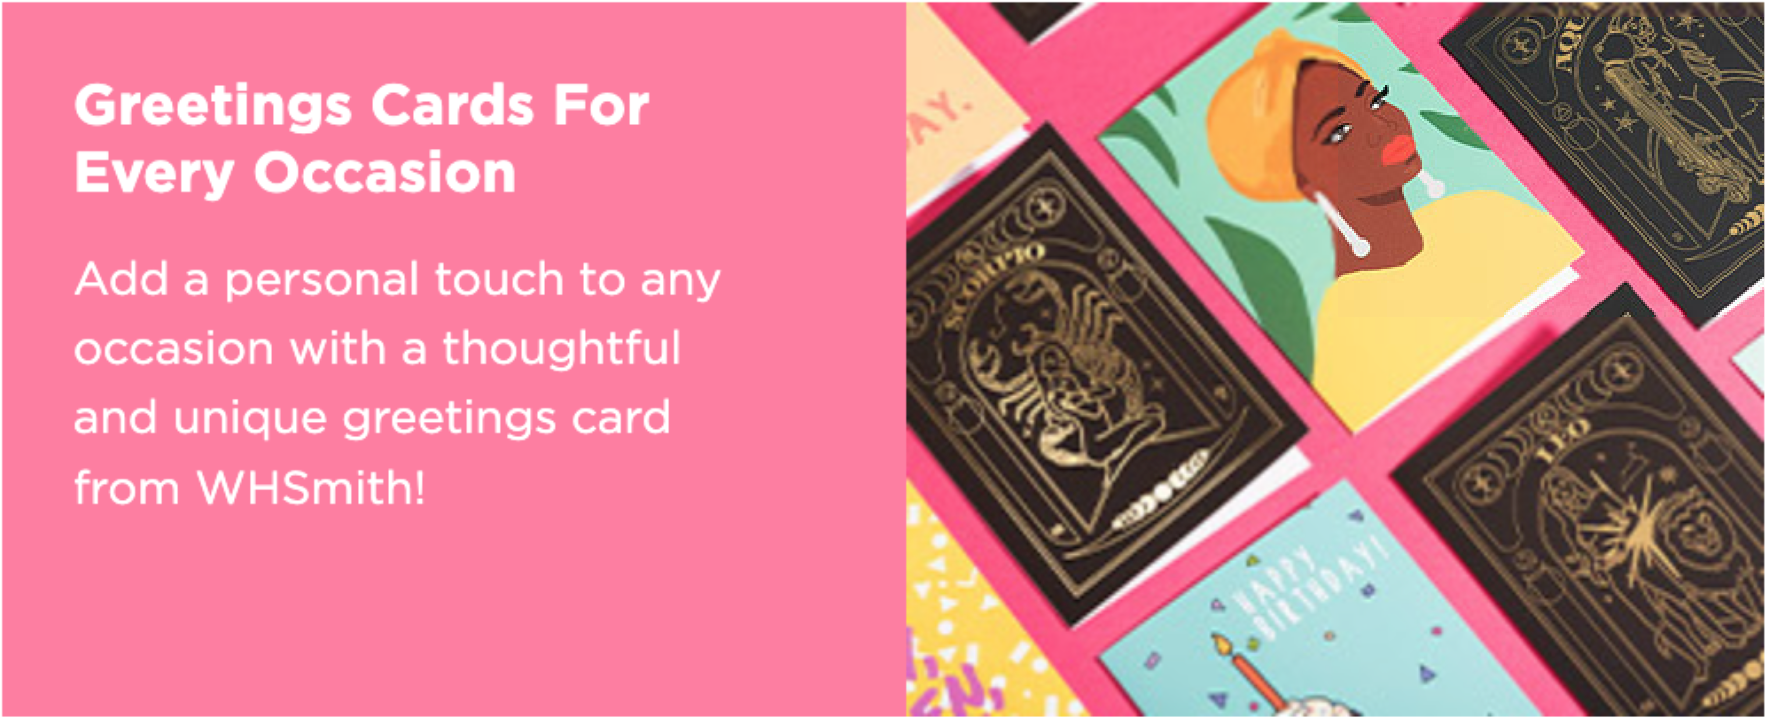 Above: Greetings offer – cards can already be ordered online from WHS